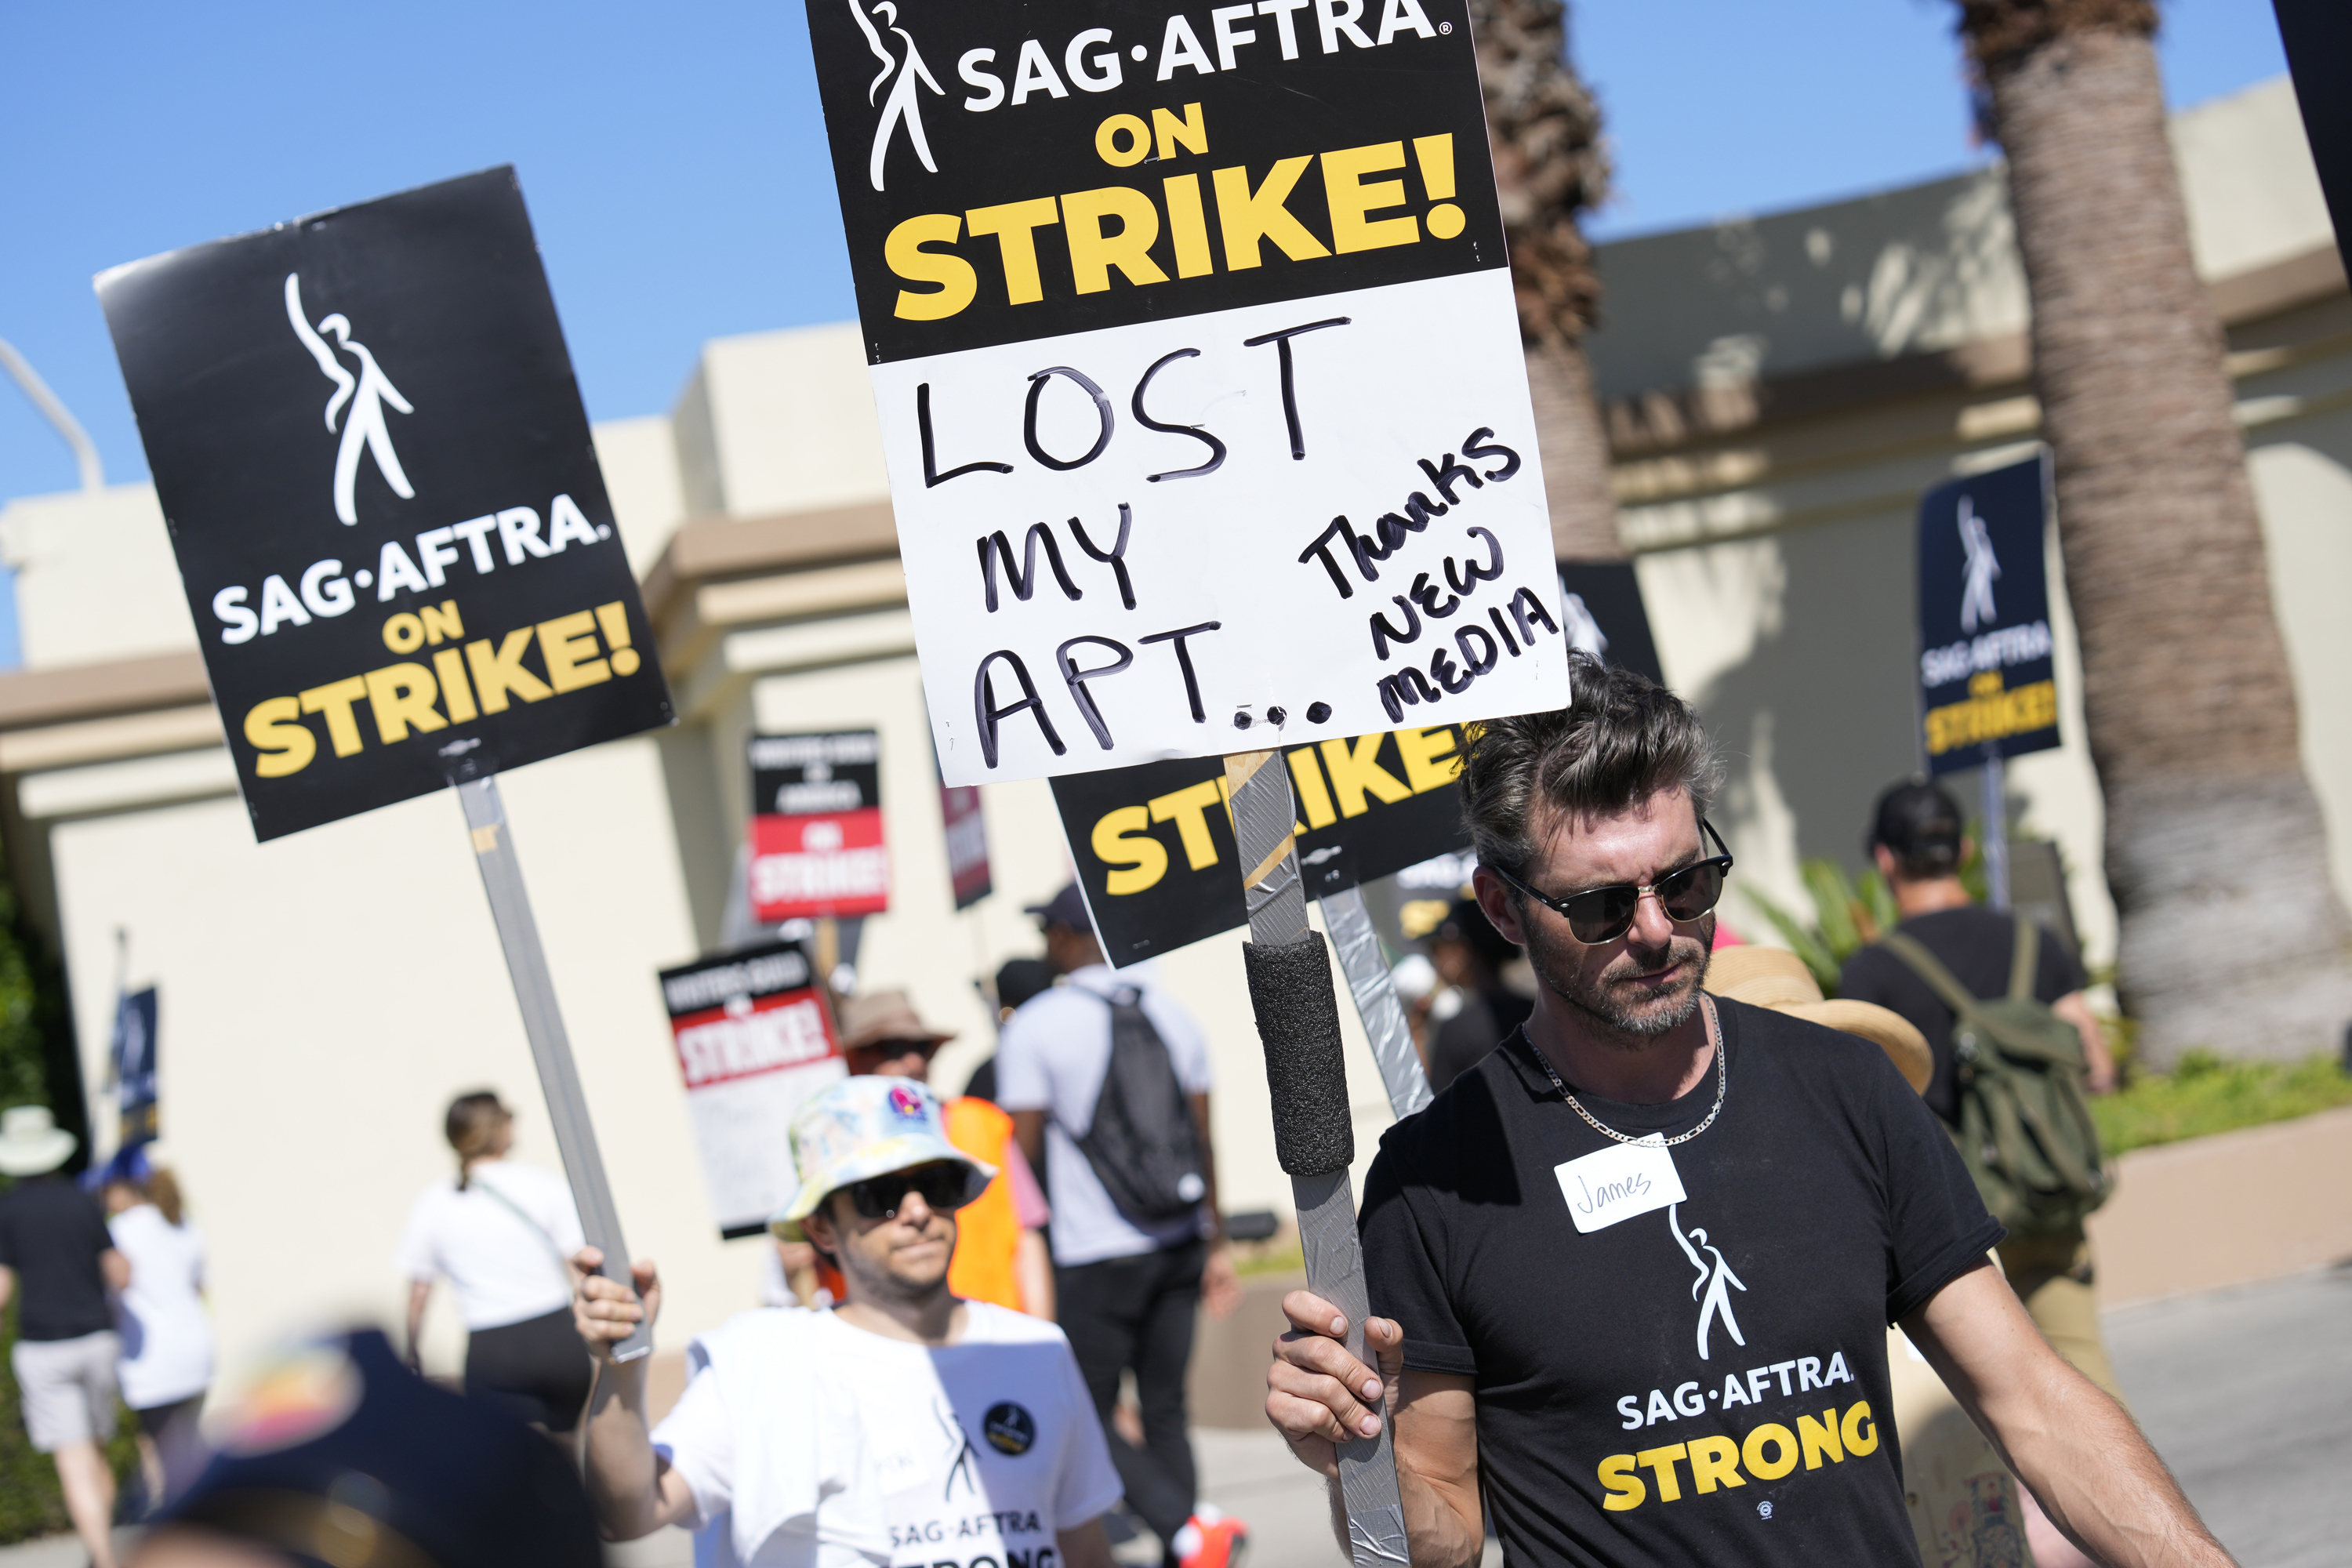 SAG-AFTRA member James Hutson carries a picket sign outside Paramount studios on Wednesday, July 19, 2023, in Los Angeles. The actors strike comes more than two months after screenwriters began striking in their bid to get better pay and working conditions. (AP Photo/Chris Pizzello)